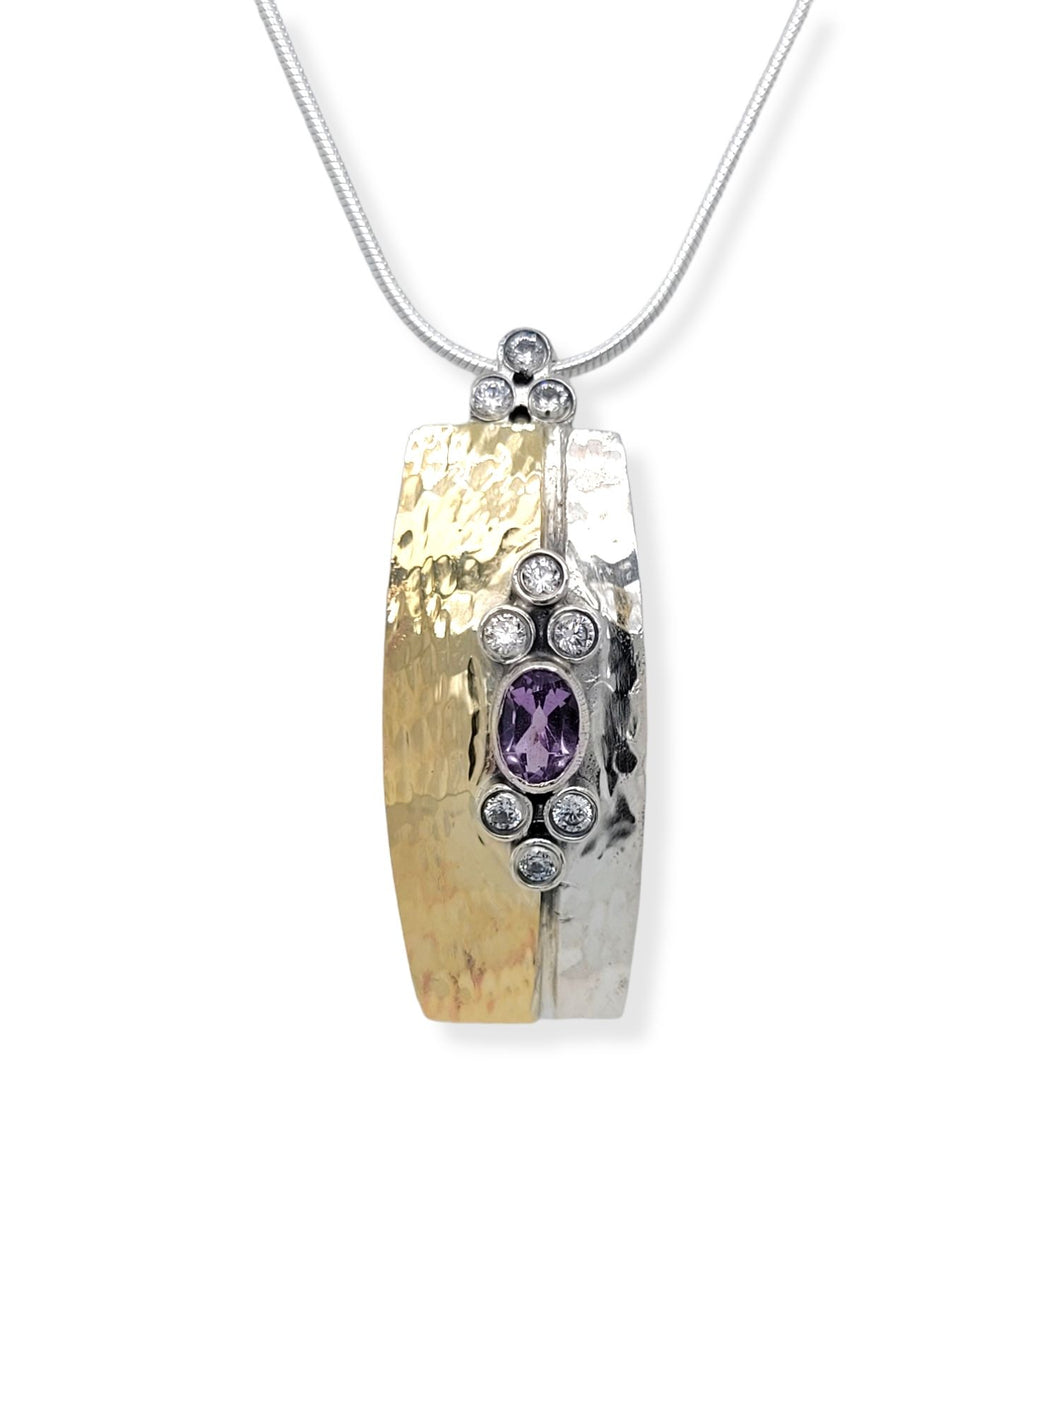 Solid Gold and Sterling Silver Amethyst and Cubic Zirconia Necklace